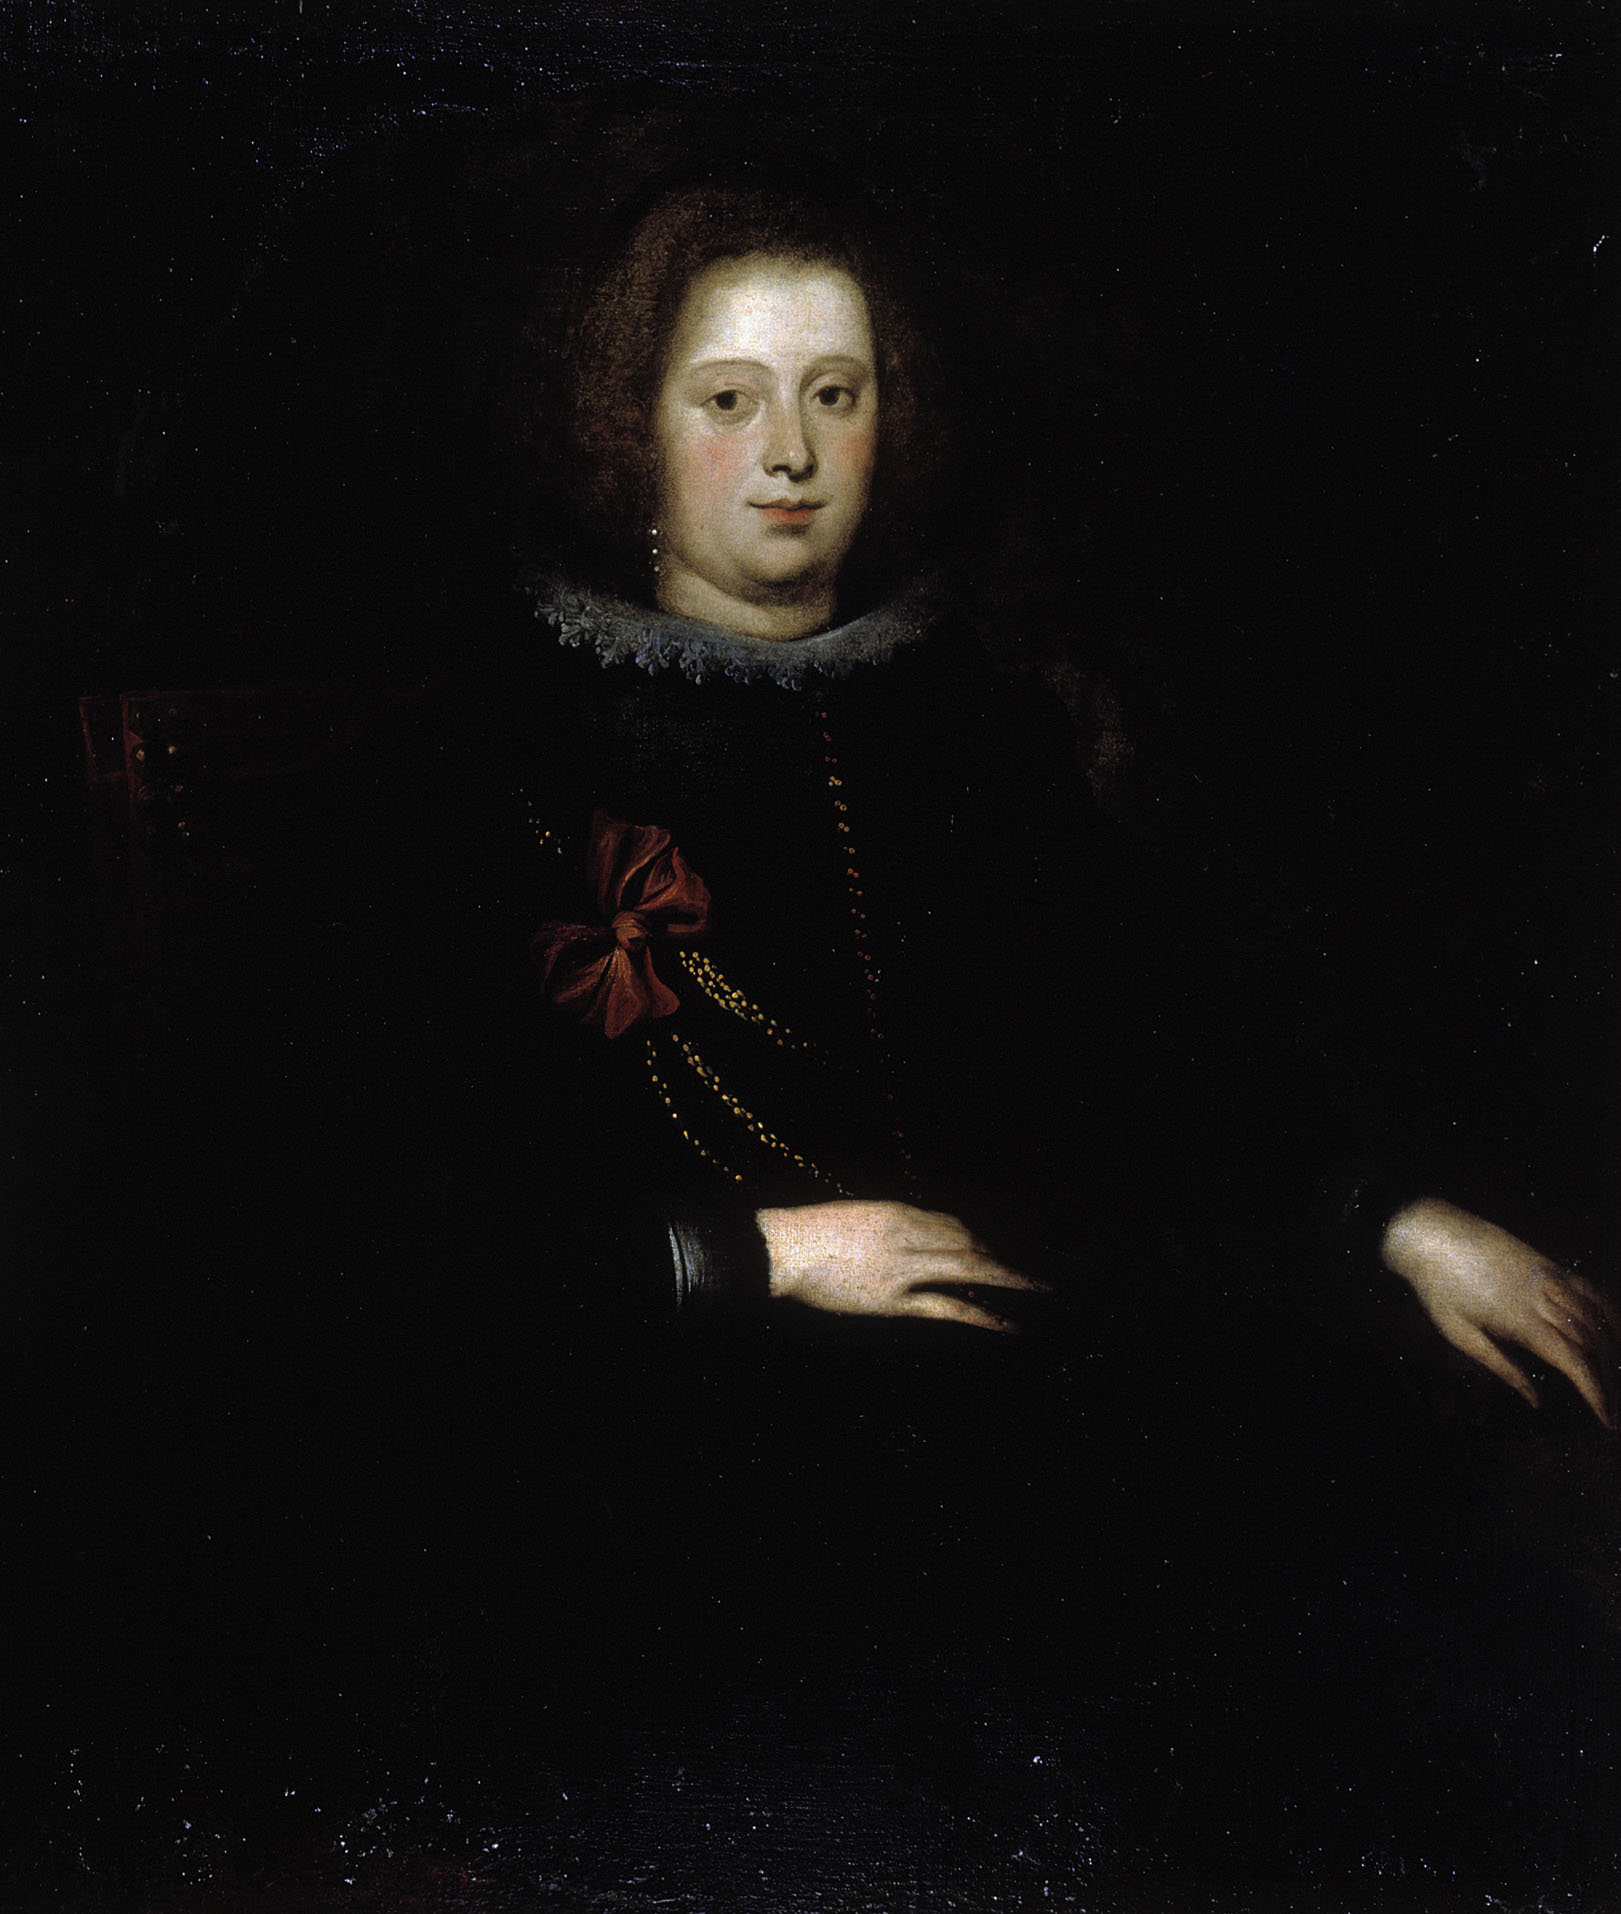 A half-length portrait of a woman dressing black, against a dark background. She has a small white lace collar and some strands of gold cord across her chest, fixed in place with a dark red bow. Her hair is pulled back, and she looks at the viewer with a neutral expression.